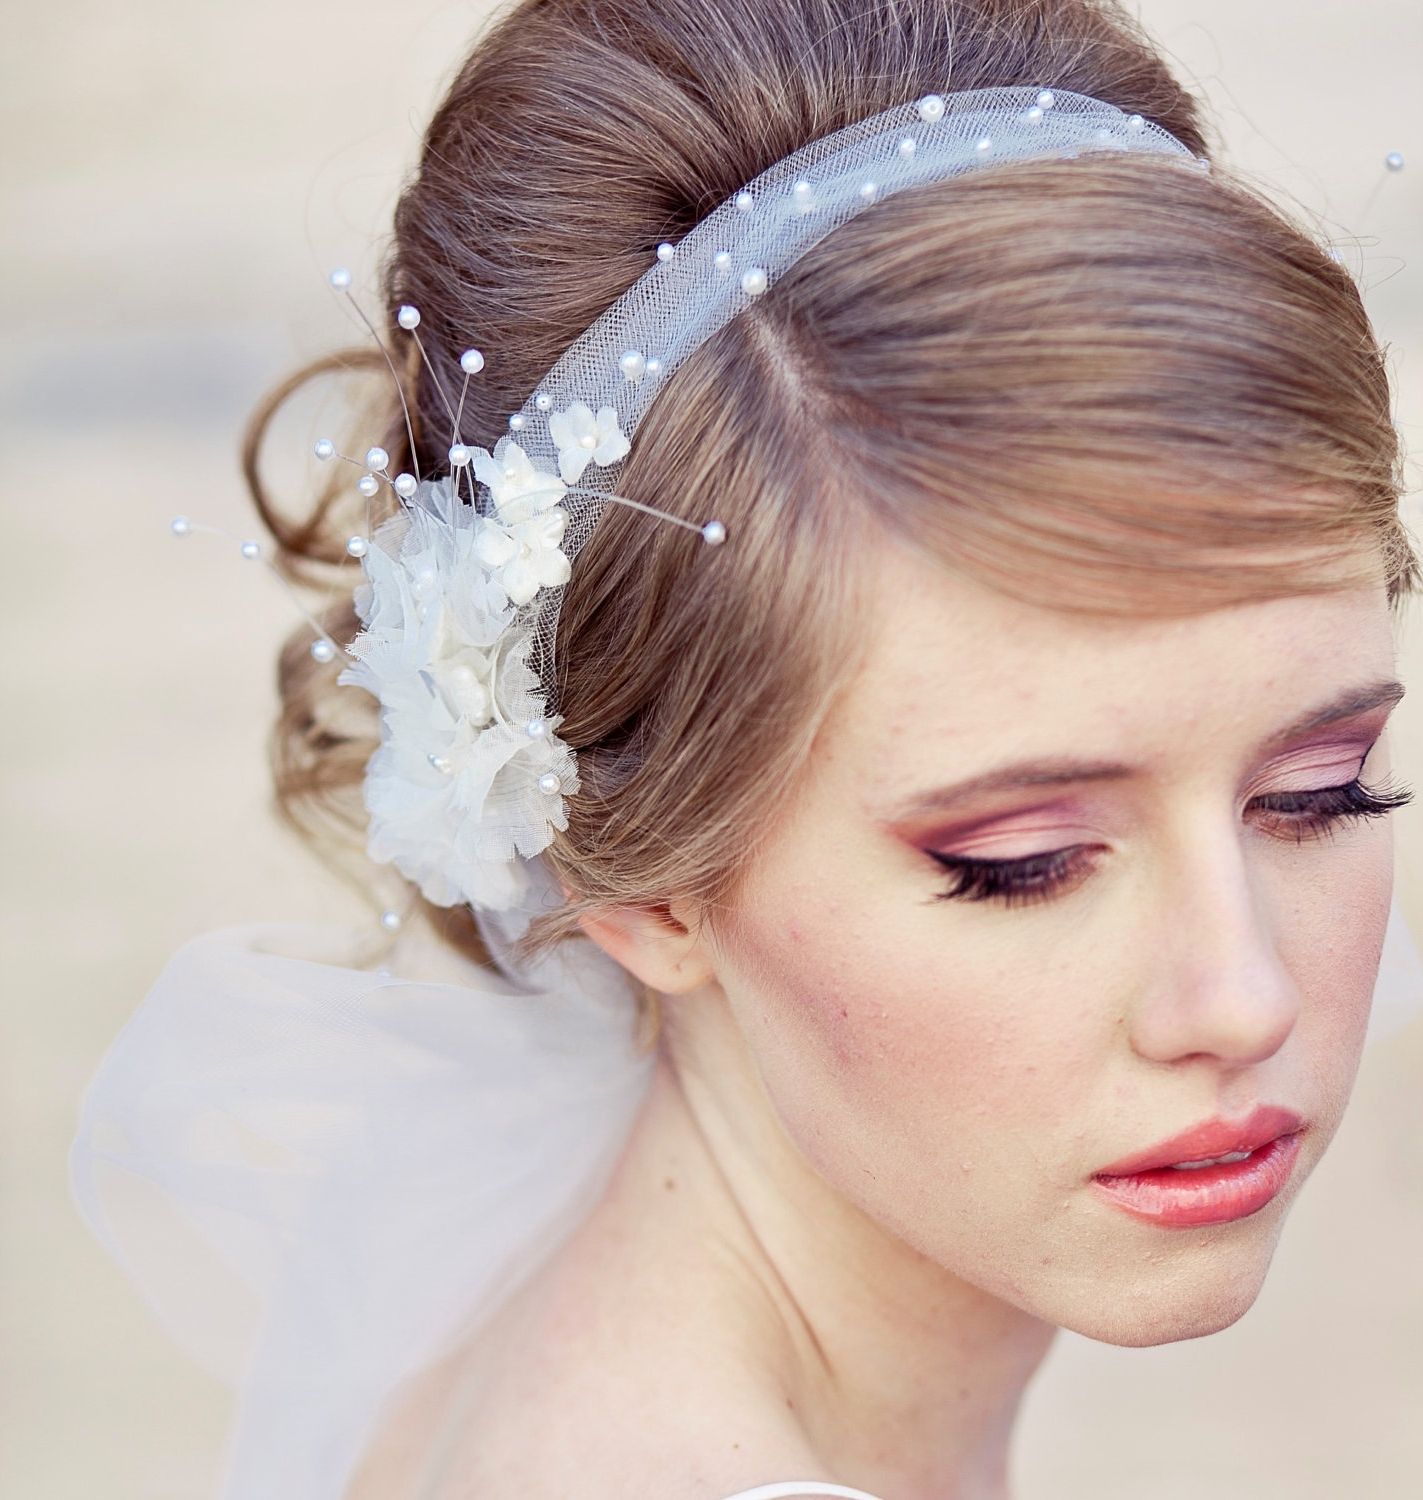 Bridal Hairstyles With Veil Cool Awesome Headbands For Wedding In Preferred Wedding Hairstyles With Headband And Veil (View 10 of 15)